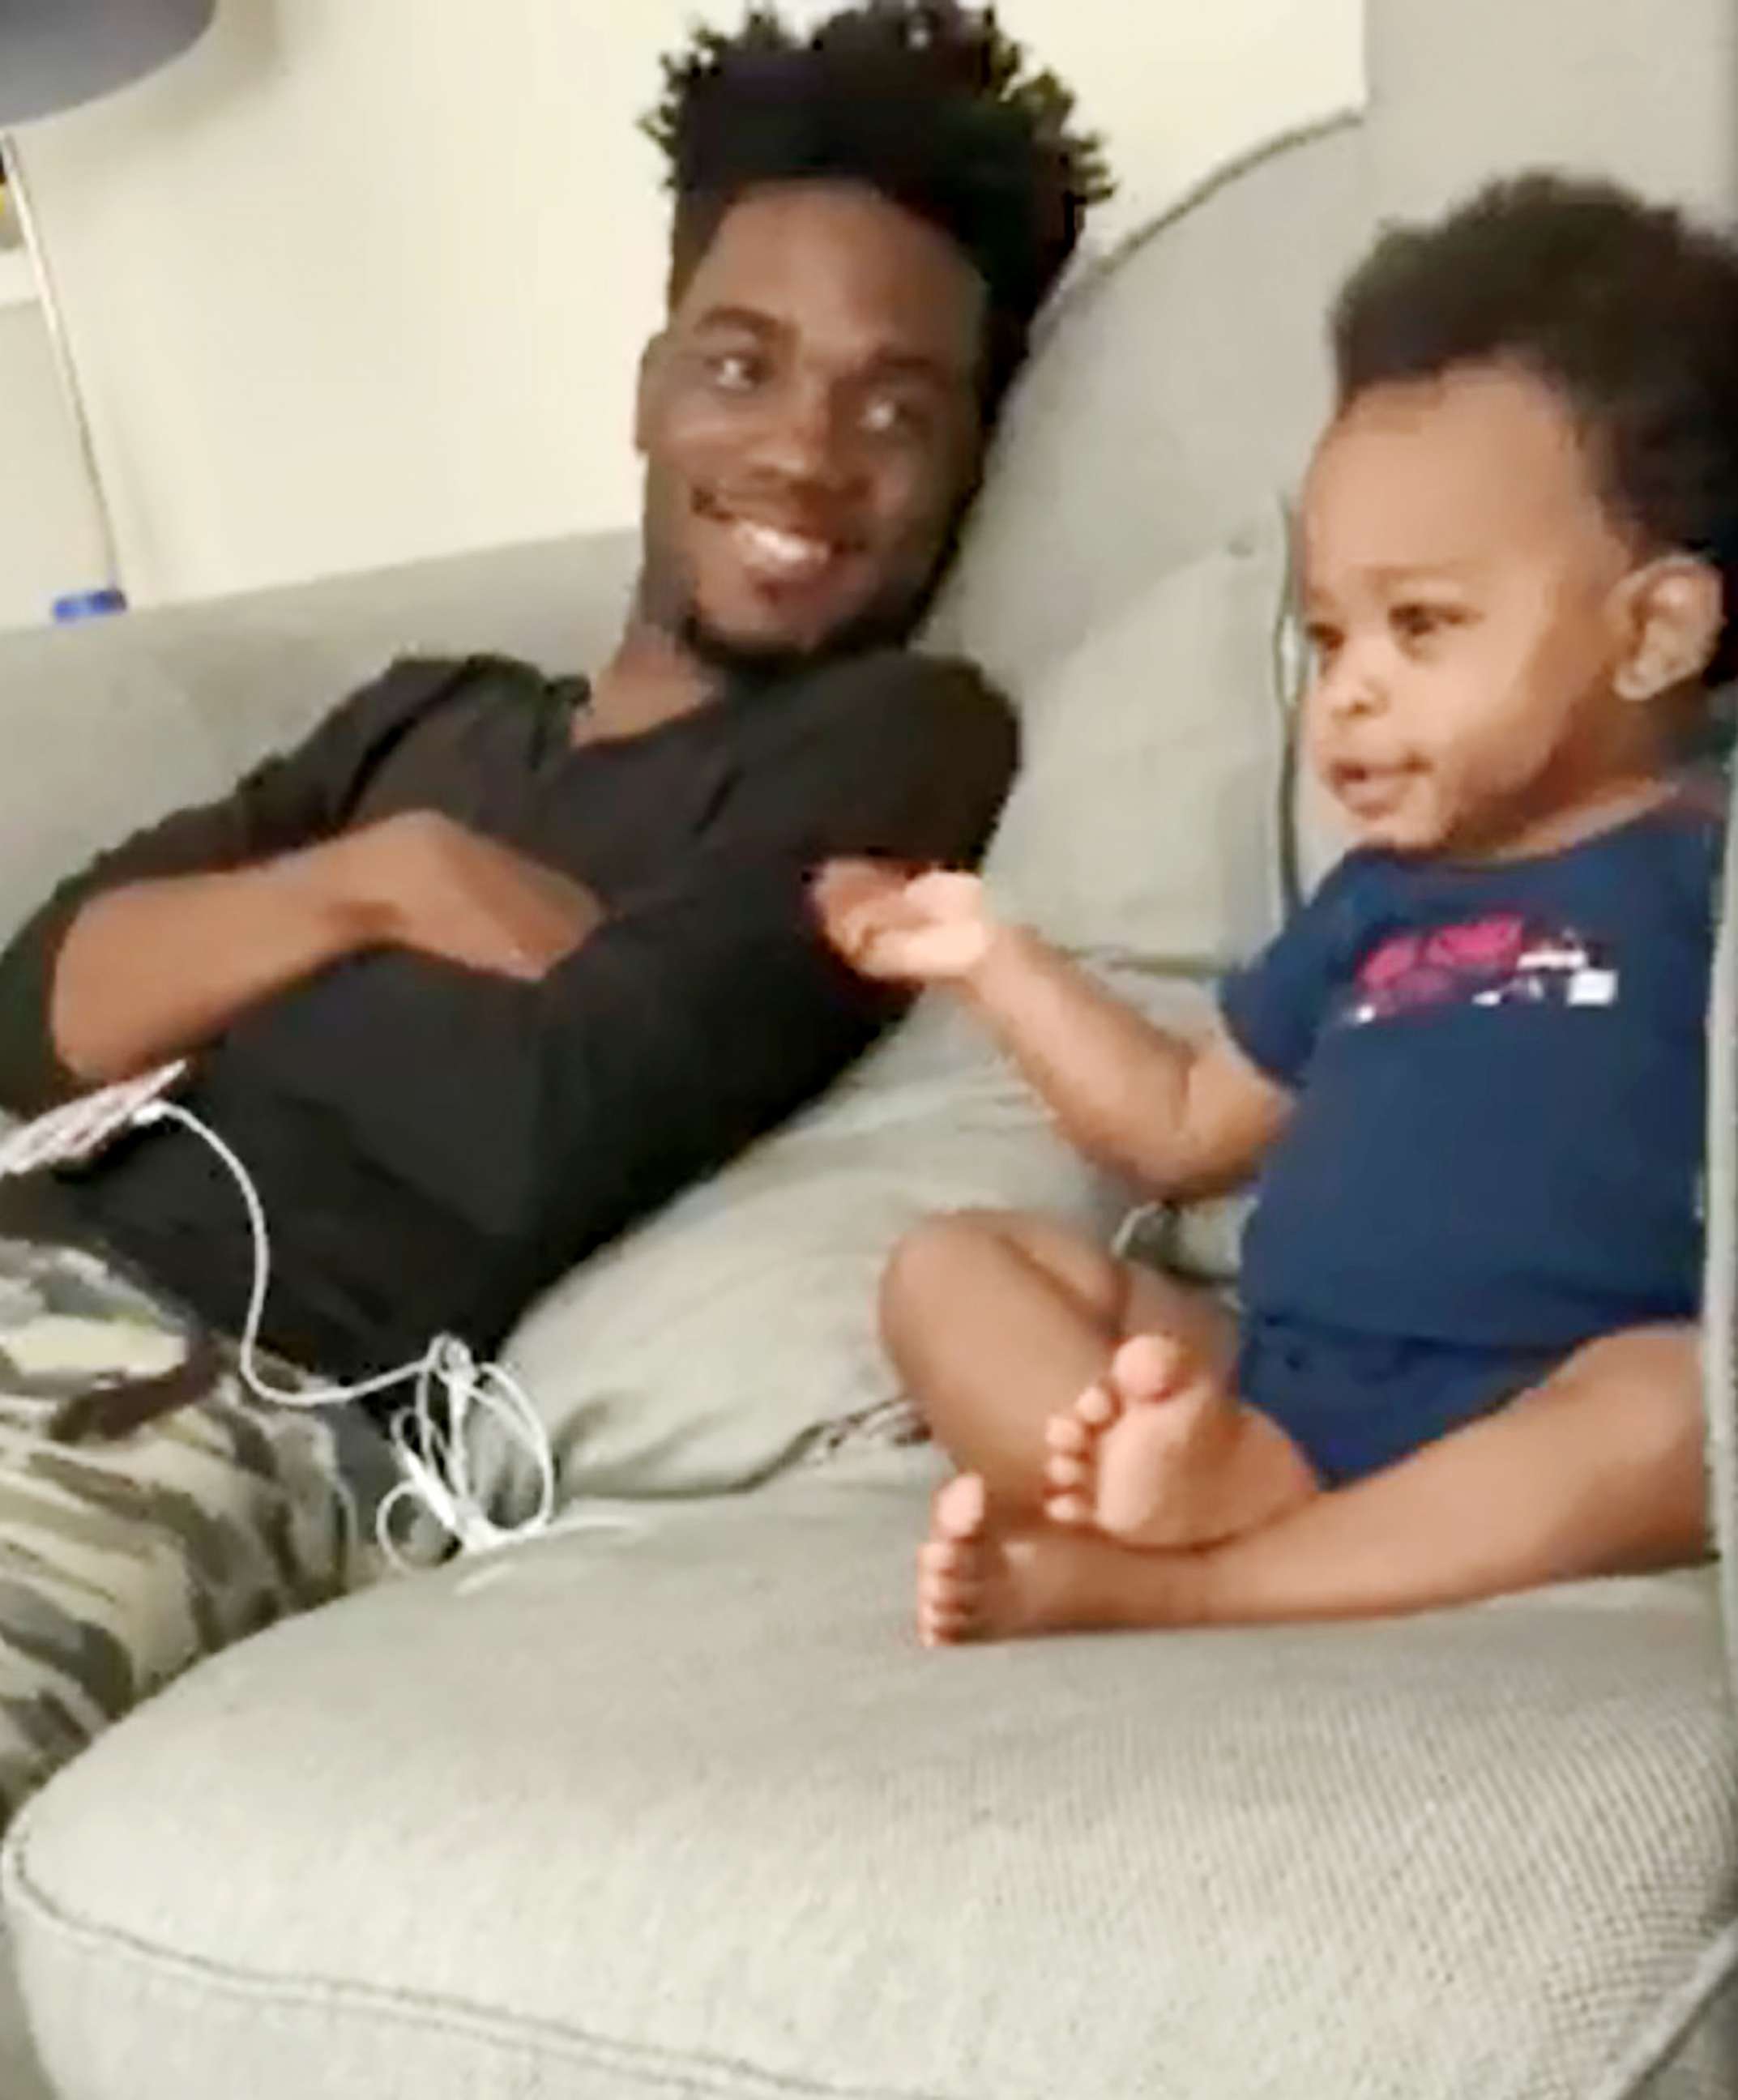 Video of a toddler having a full-on conversation with dad is